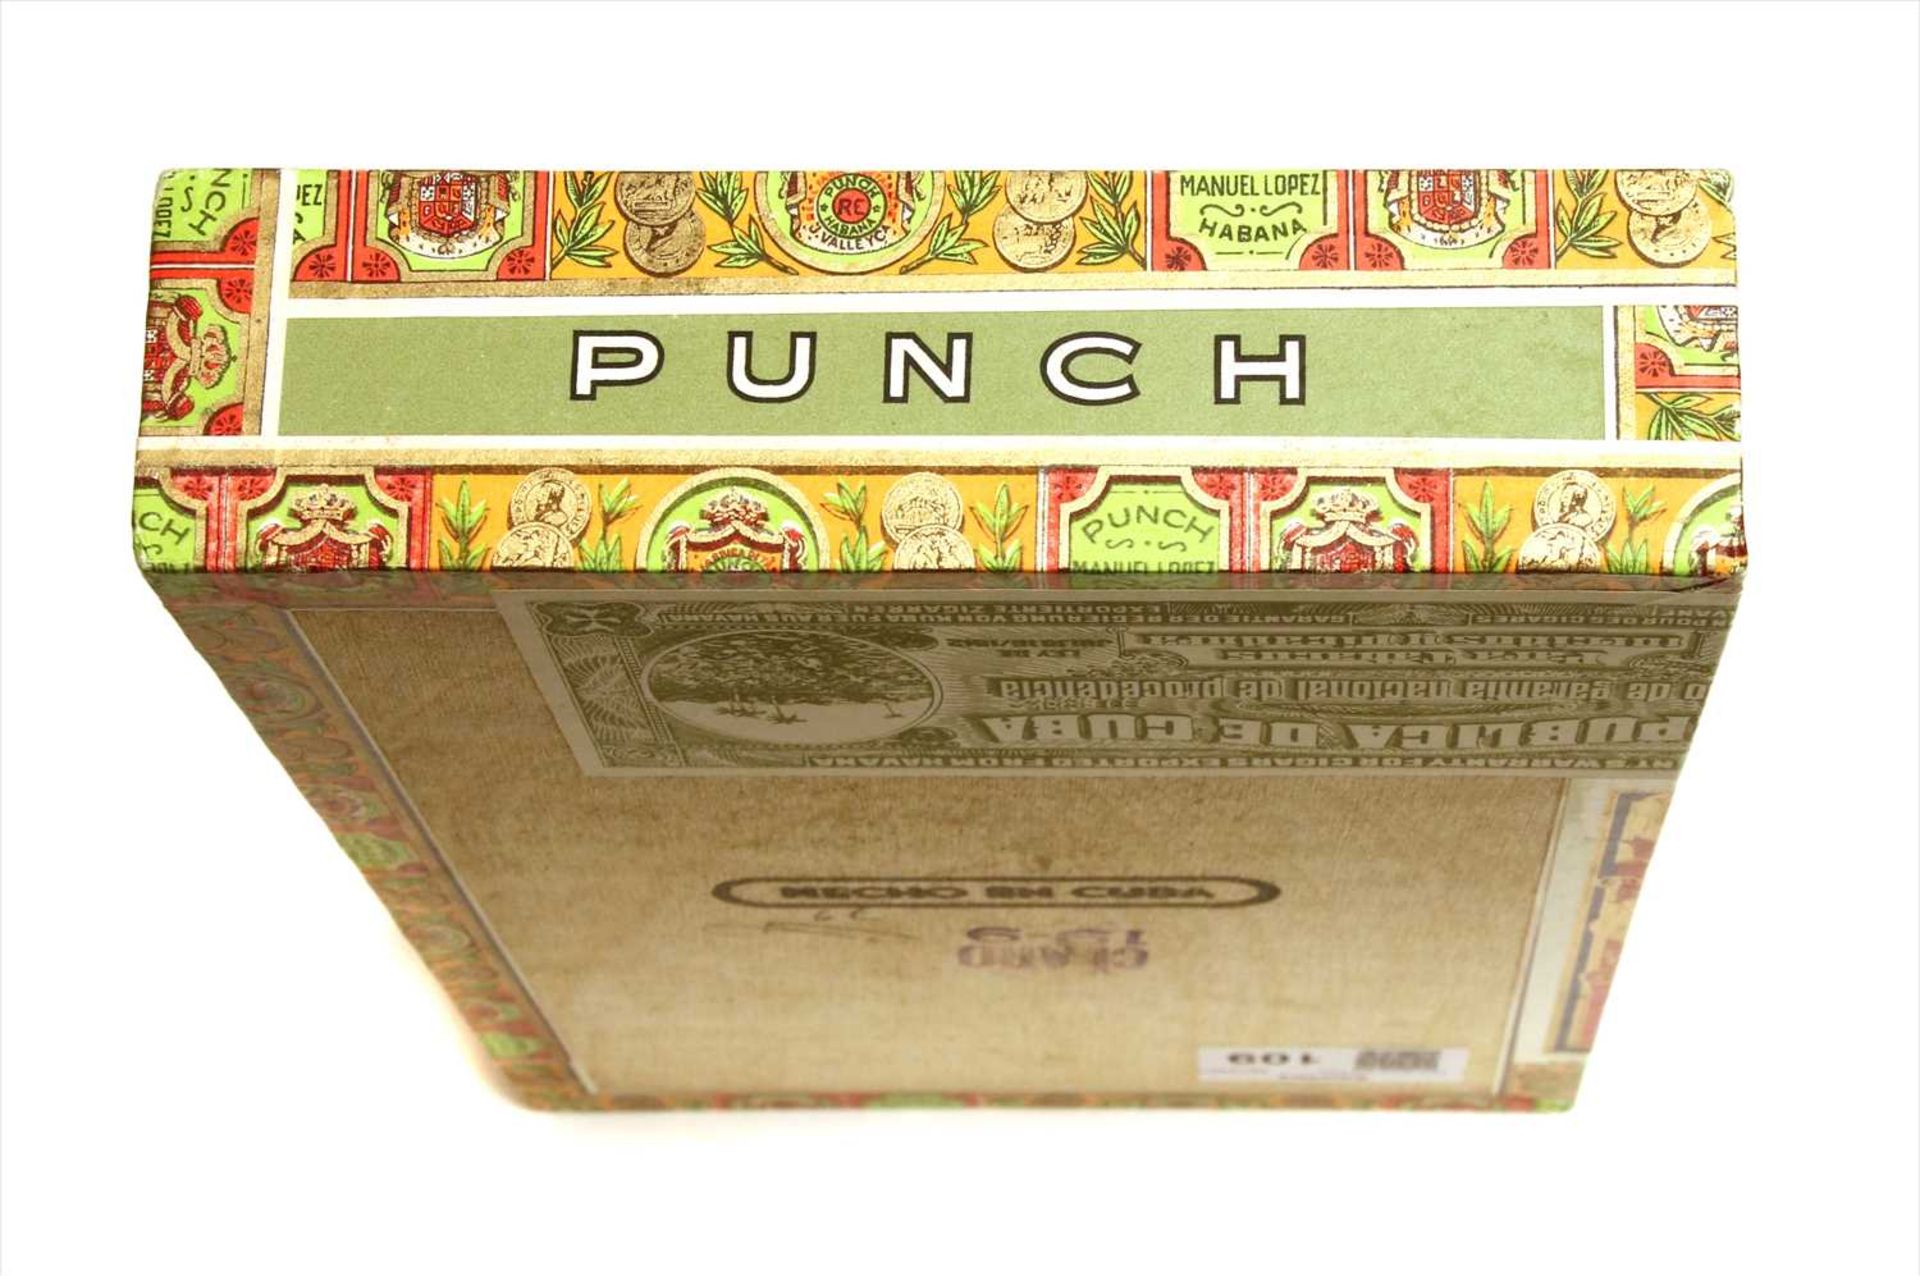 J. Valle & Co, Manuel Lopez, 25 Punch-Punch, boxed - Image 4 of 4